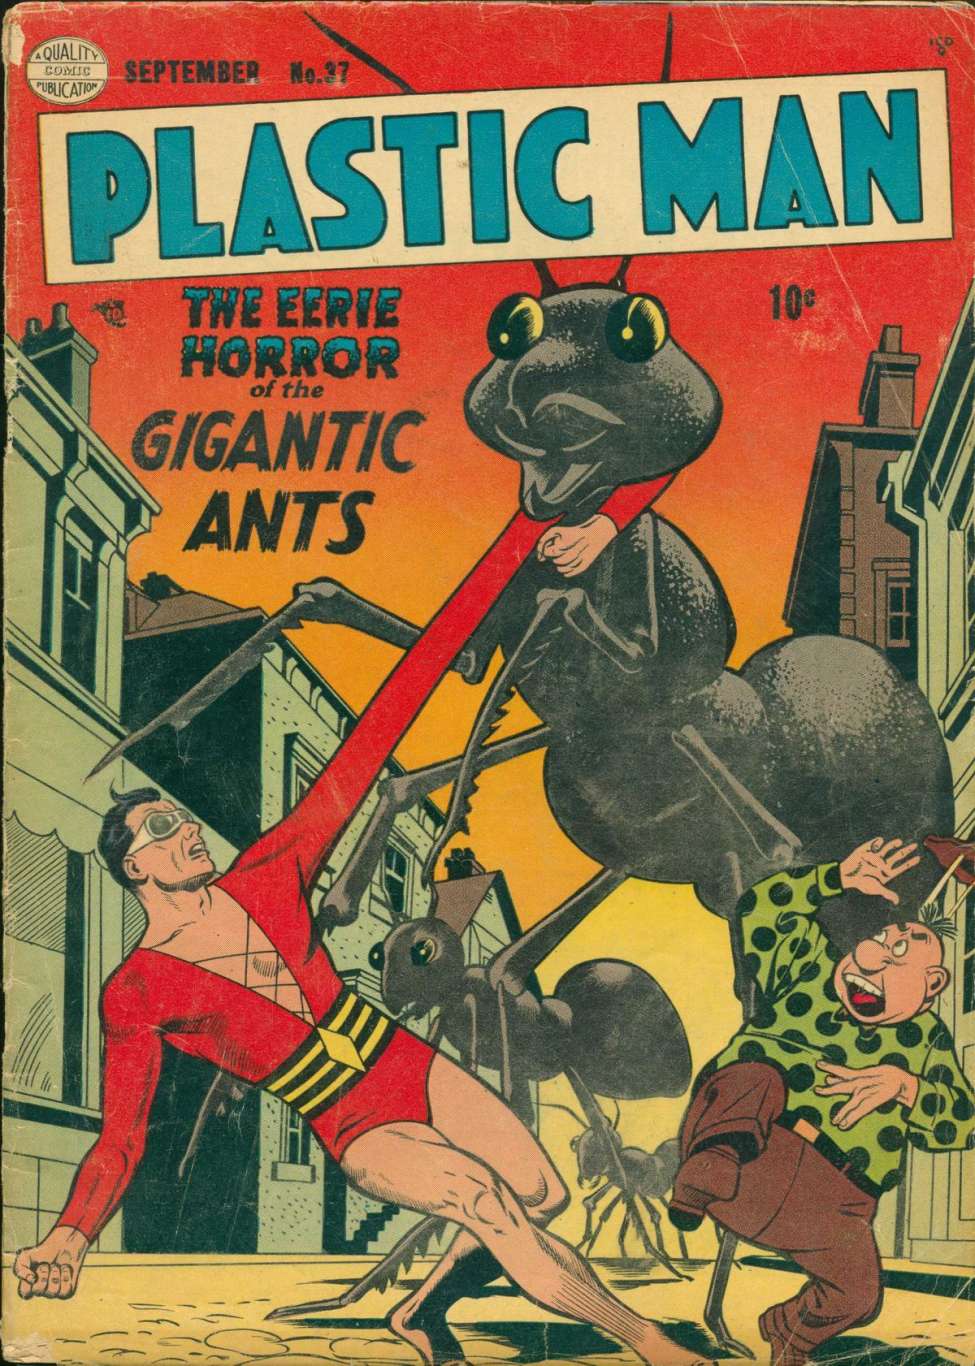 Book Cover For Plastic Man 37